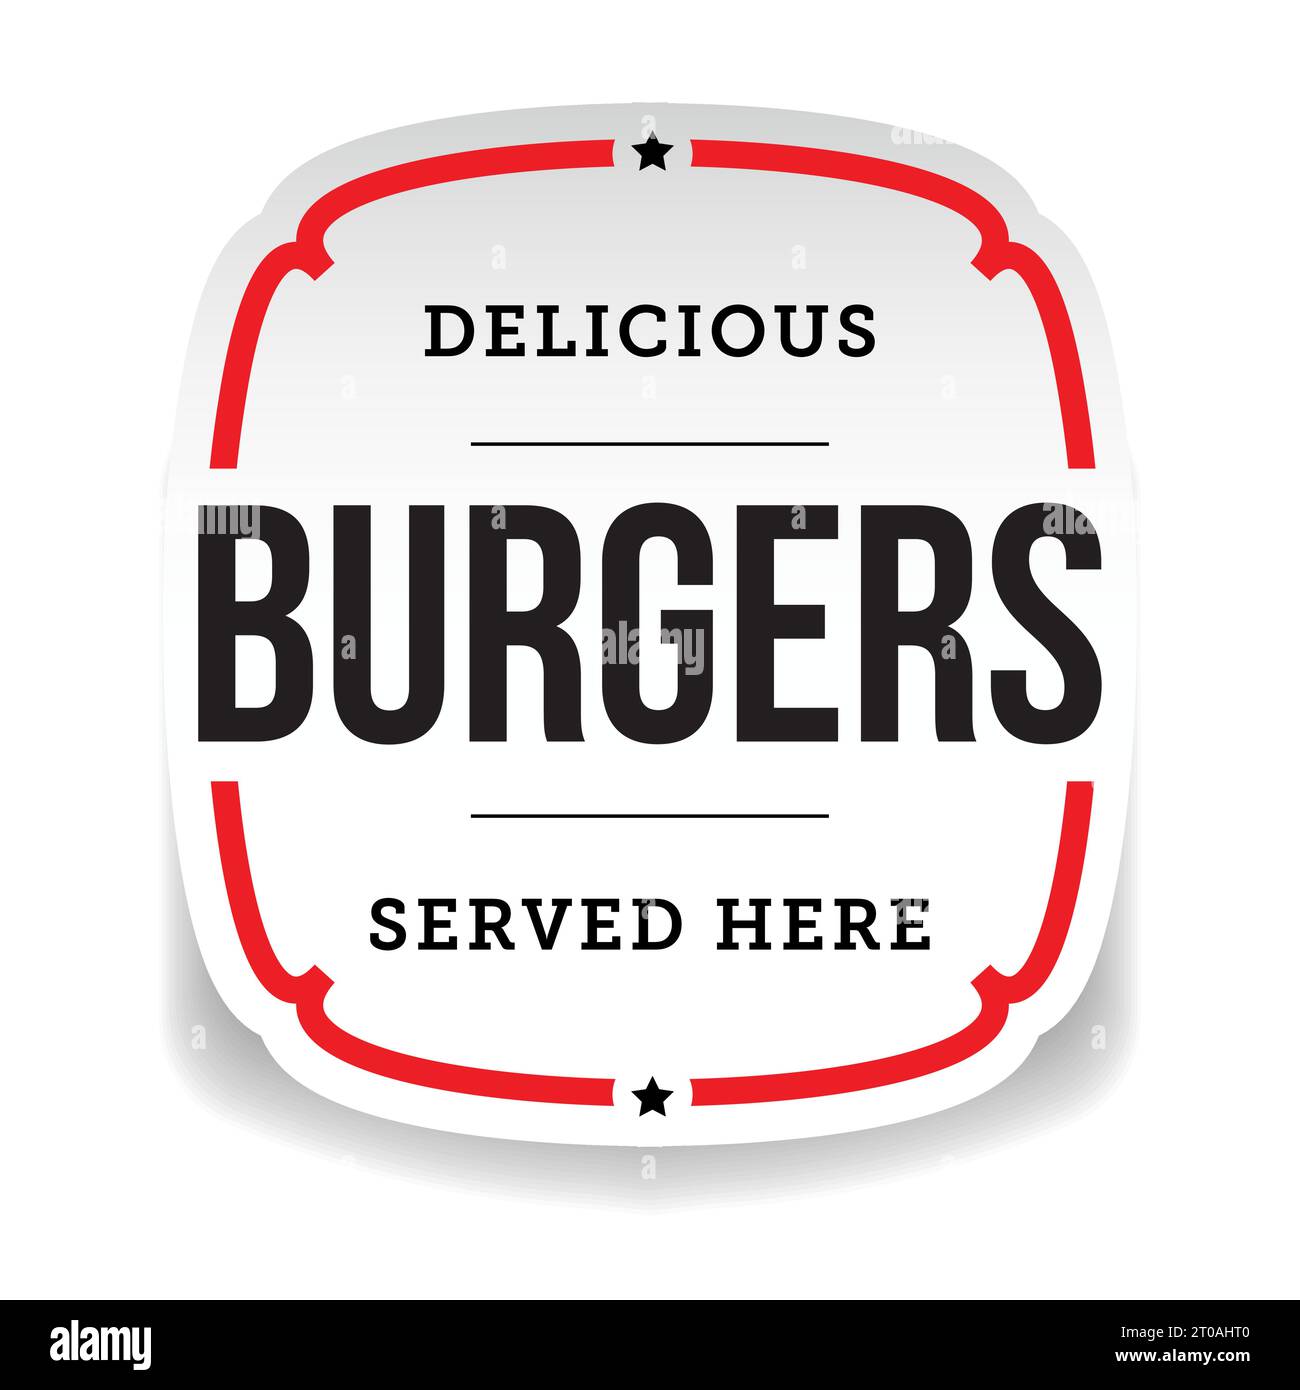 Delicious Burgers Served here vintage label Stock Vector